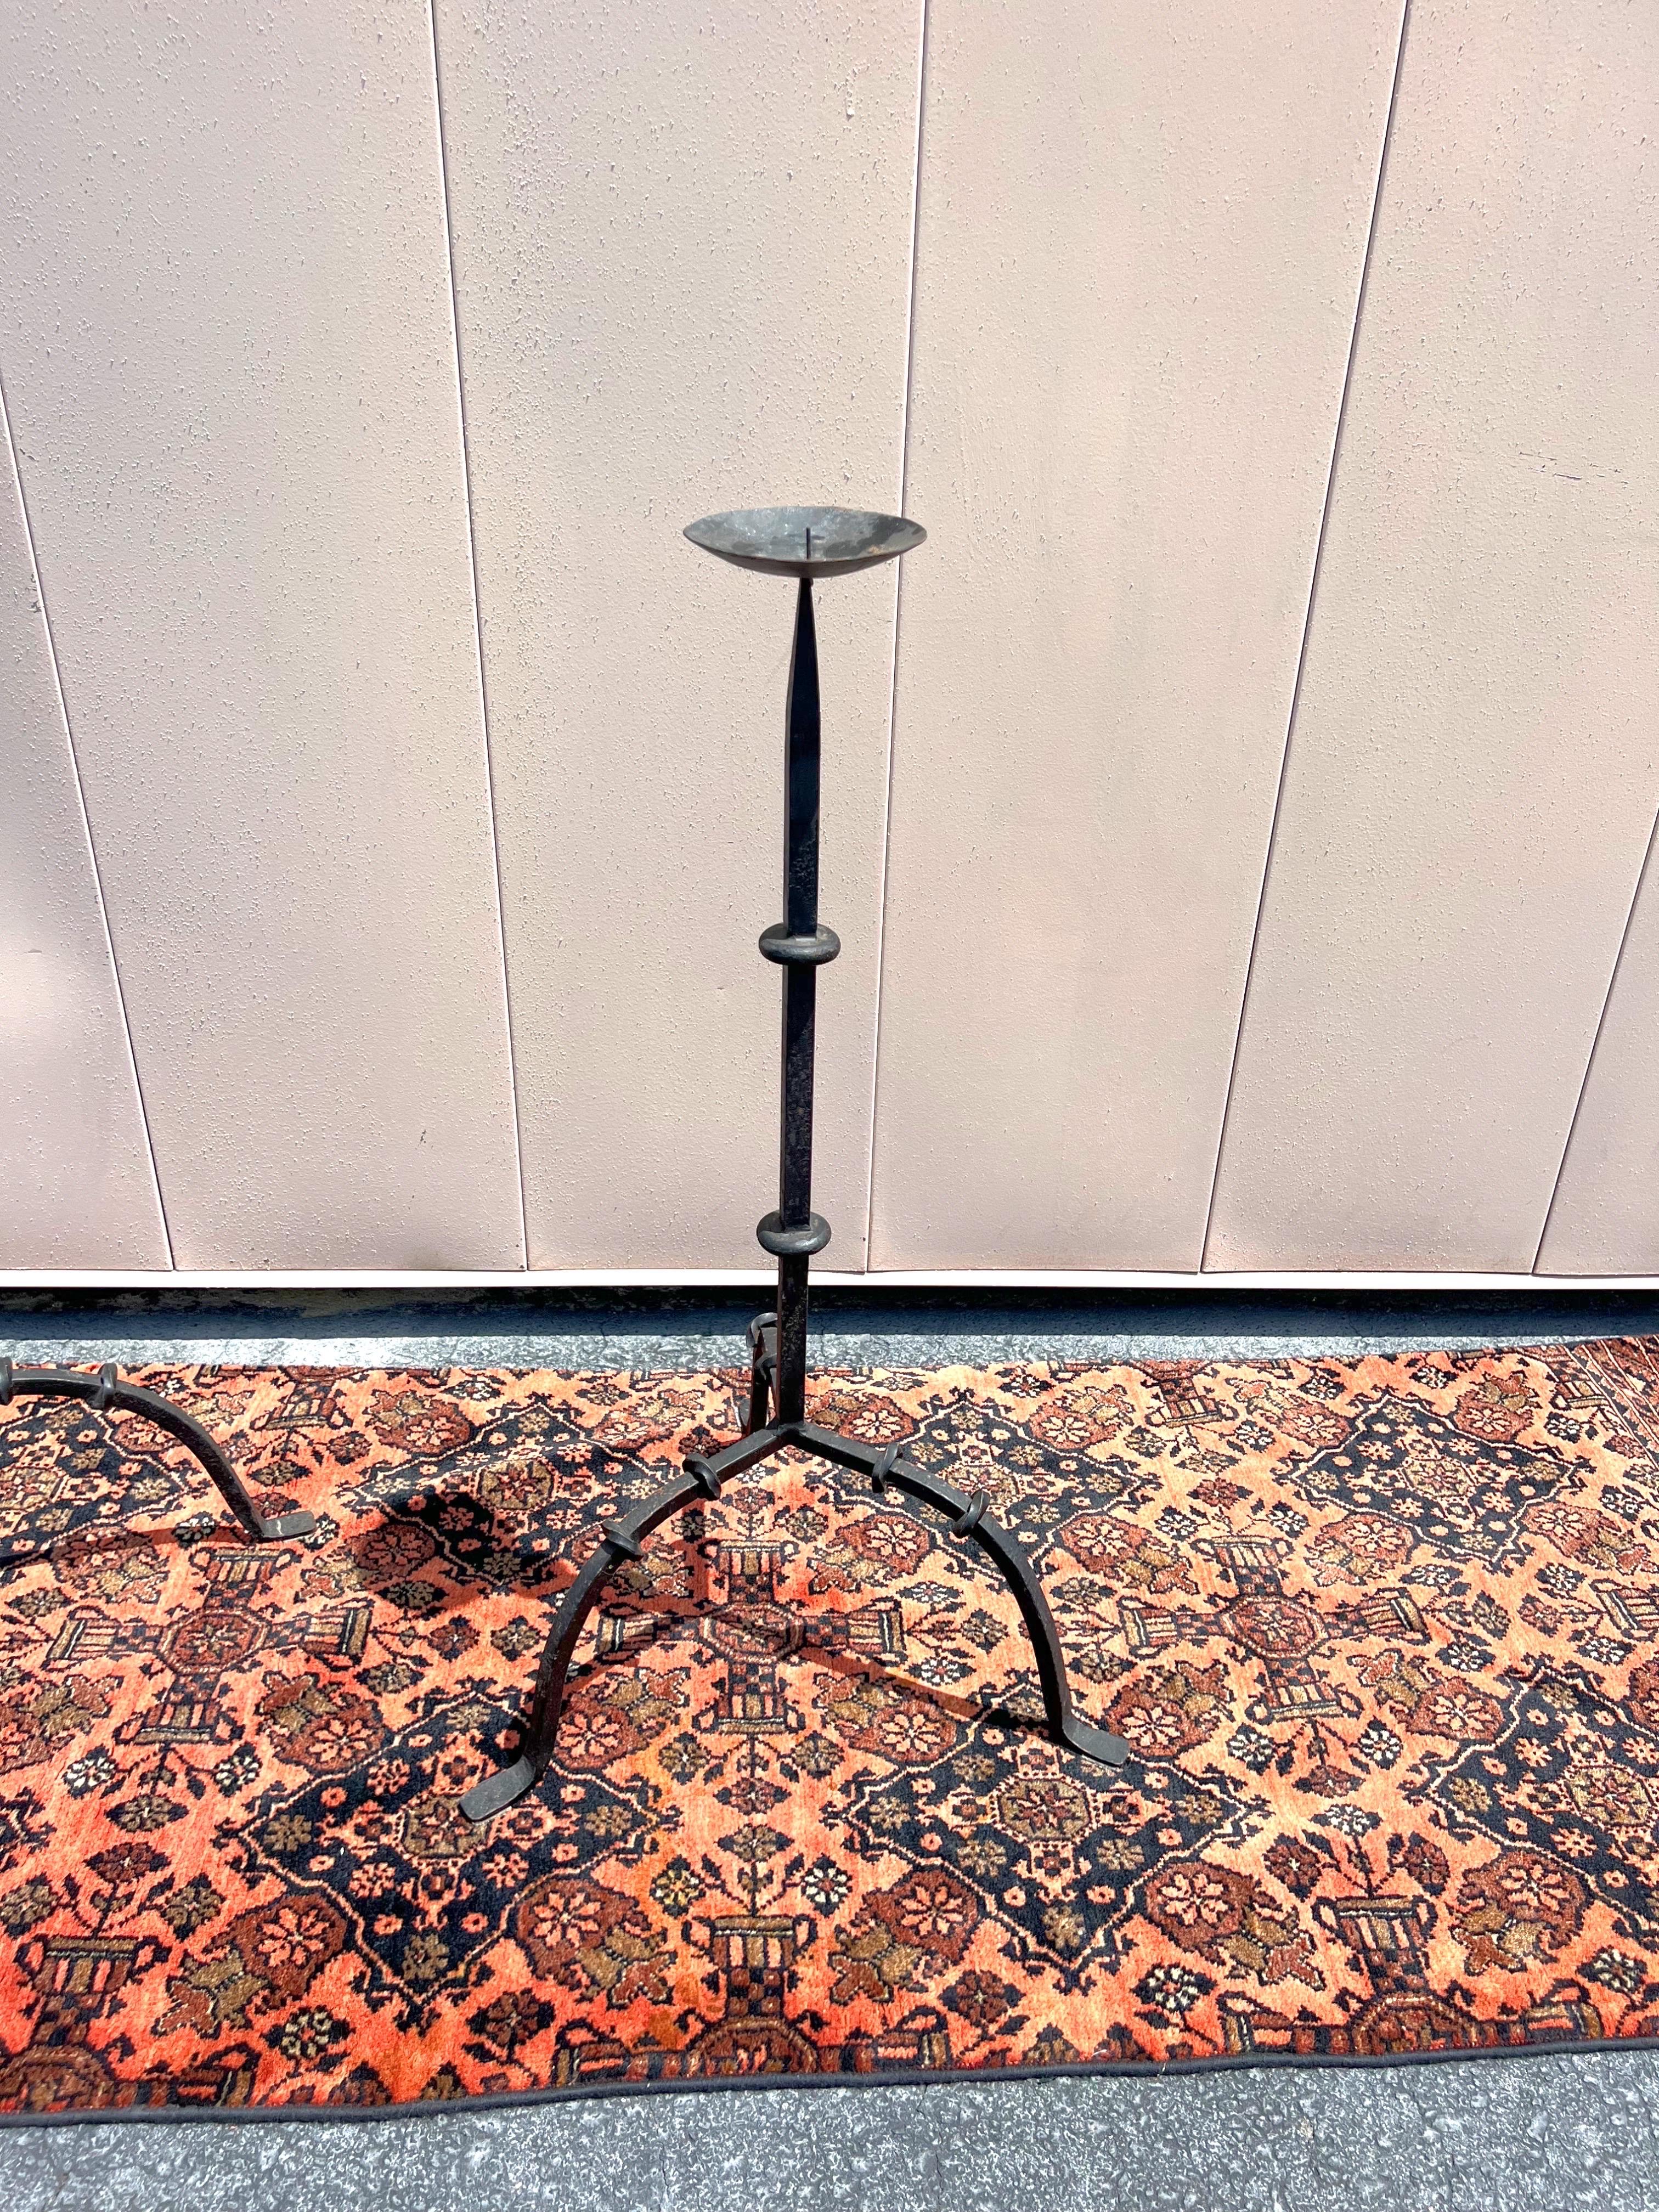 A wonderful pair of Antique 19th Century French style hand forged iron candle stands.  They put off a statement with their simple design.  C. 19th century 
Tall measures: 41” tall x 17” circumference at the base
Smaller one measures: 30.25” tall x